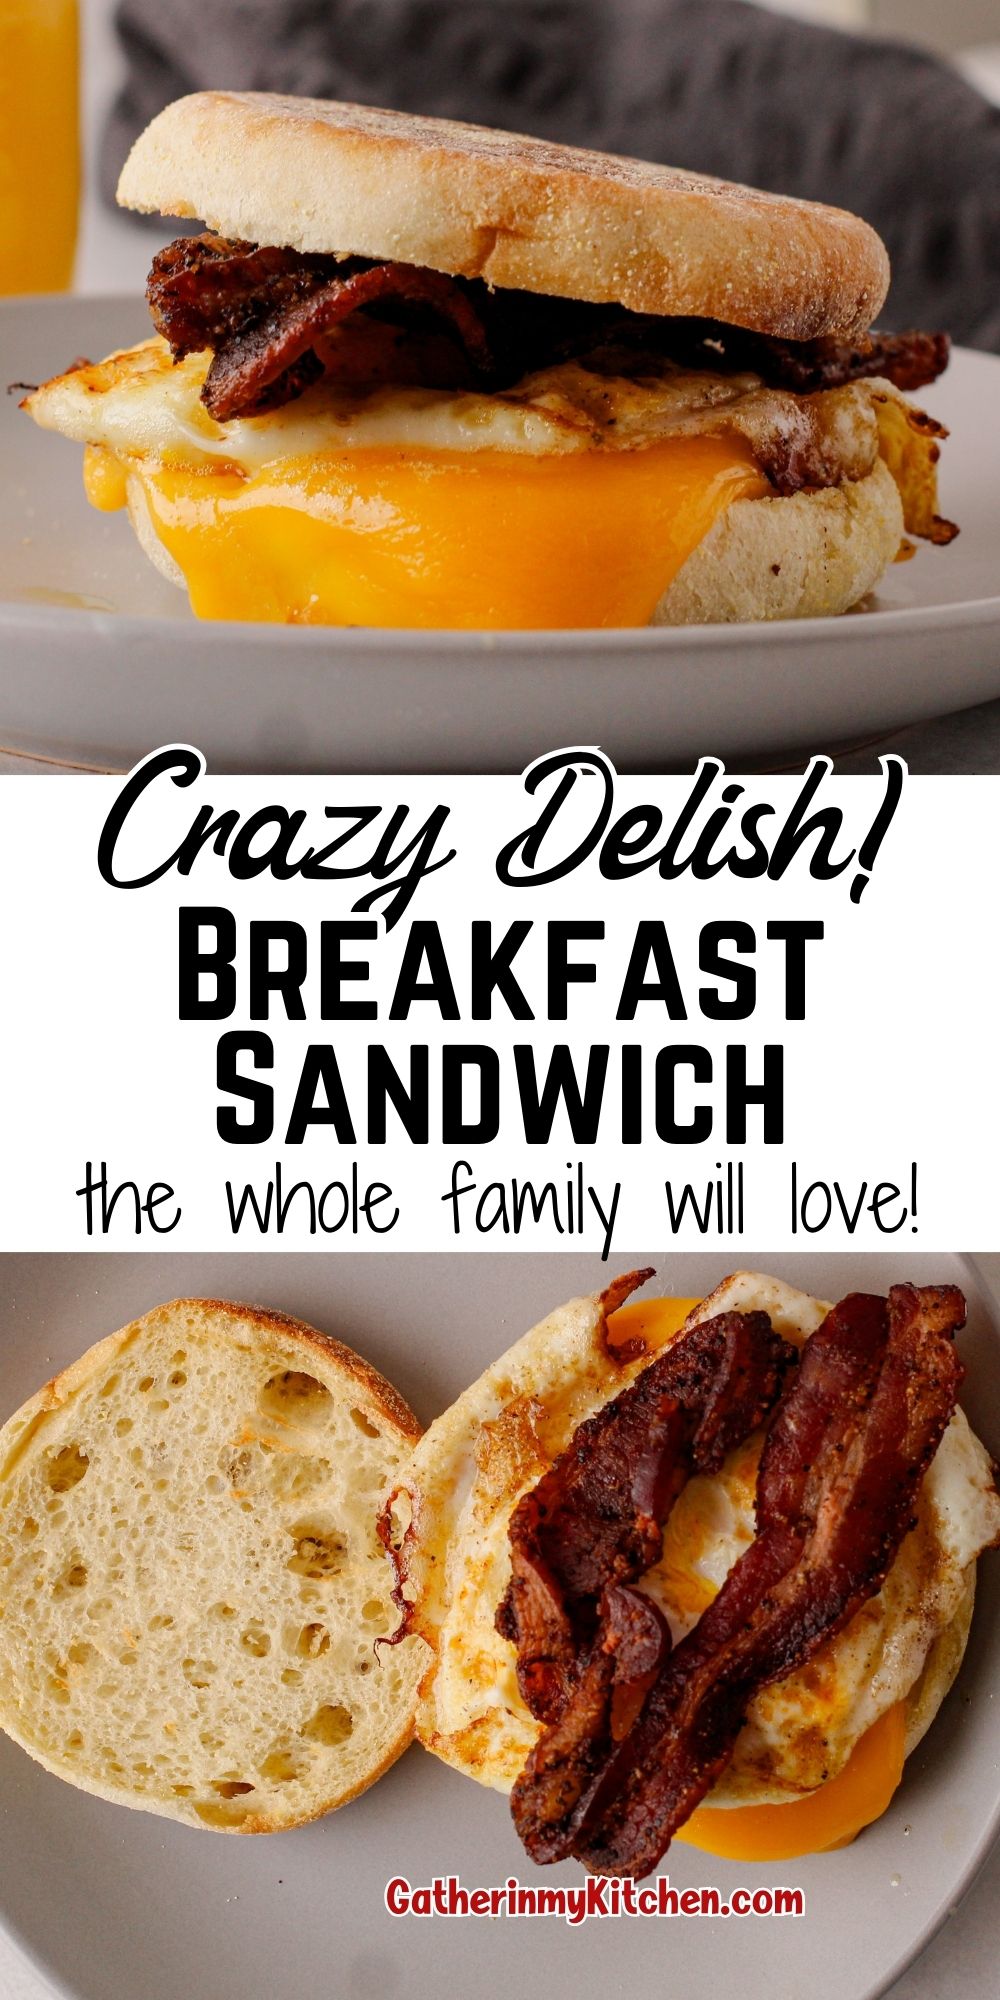 Pin image: top and bottom images of breakfast sandwich and middle says "Crazy Delish! Breakfast Sandwich the whole family will love!"